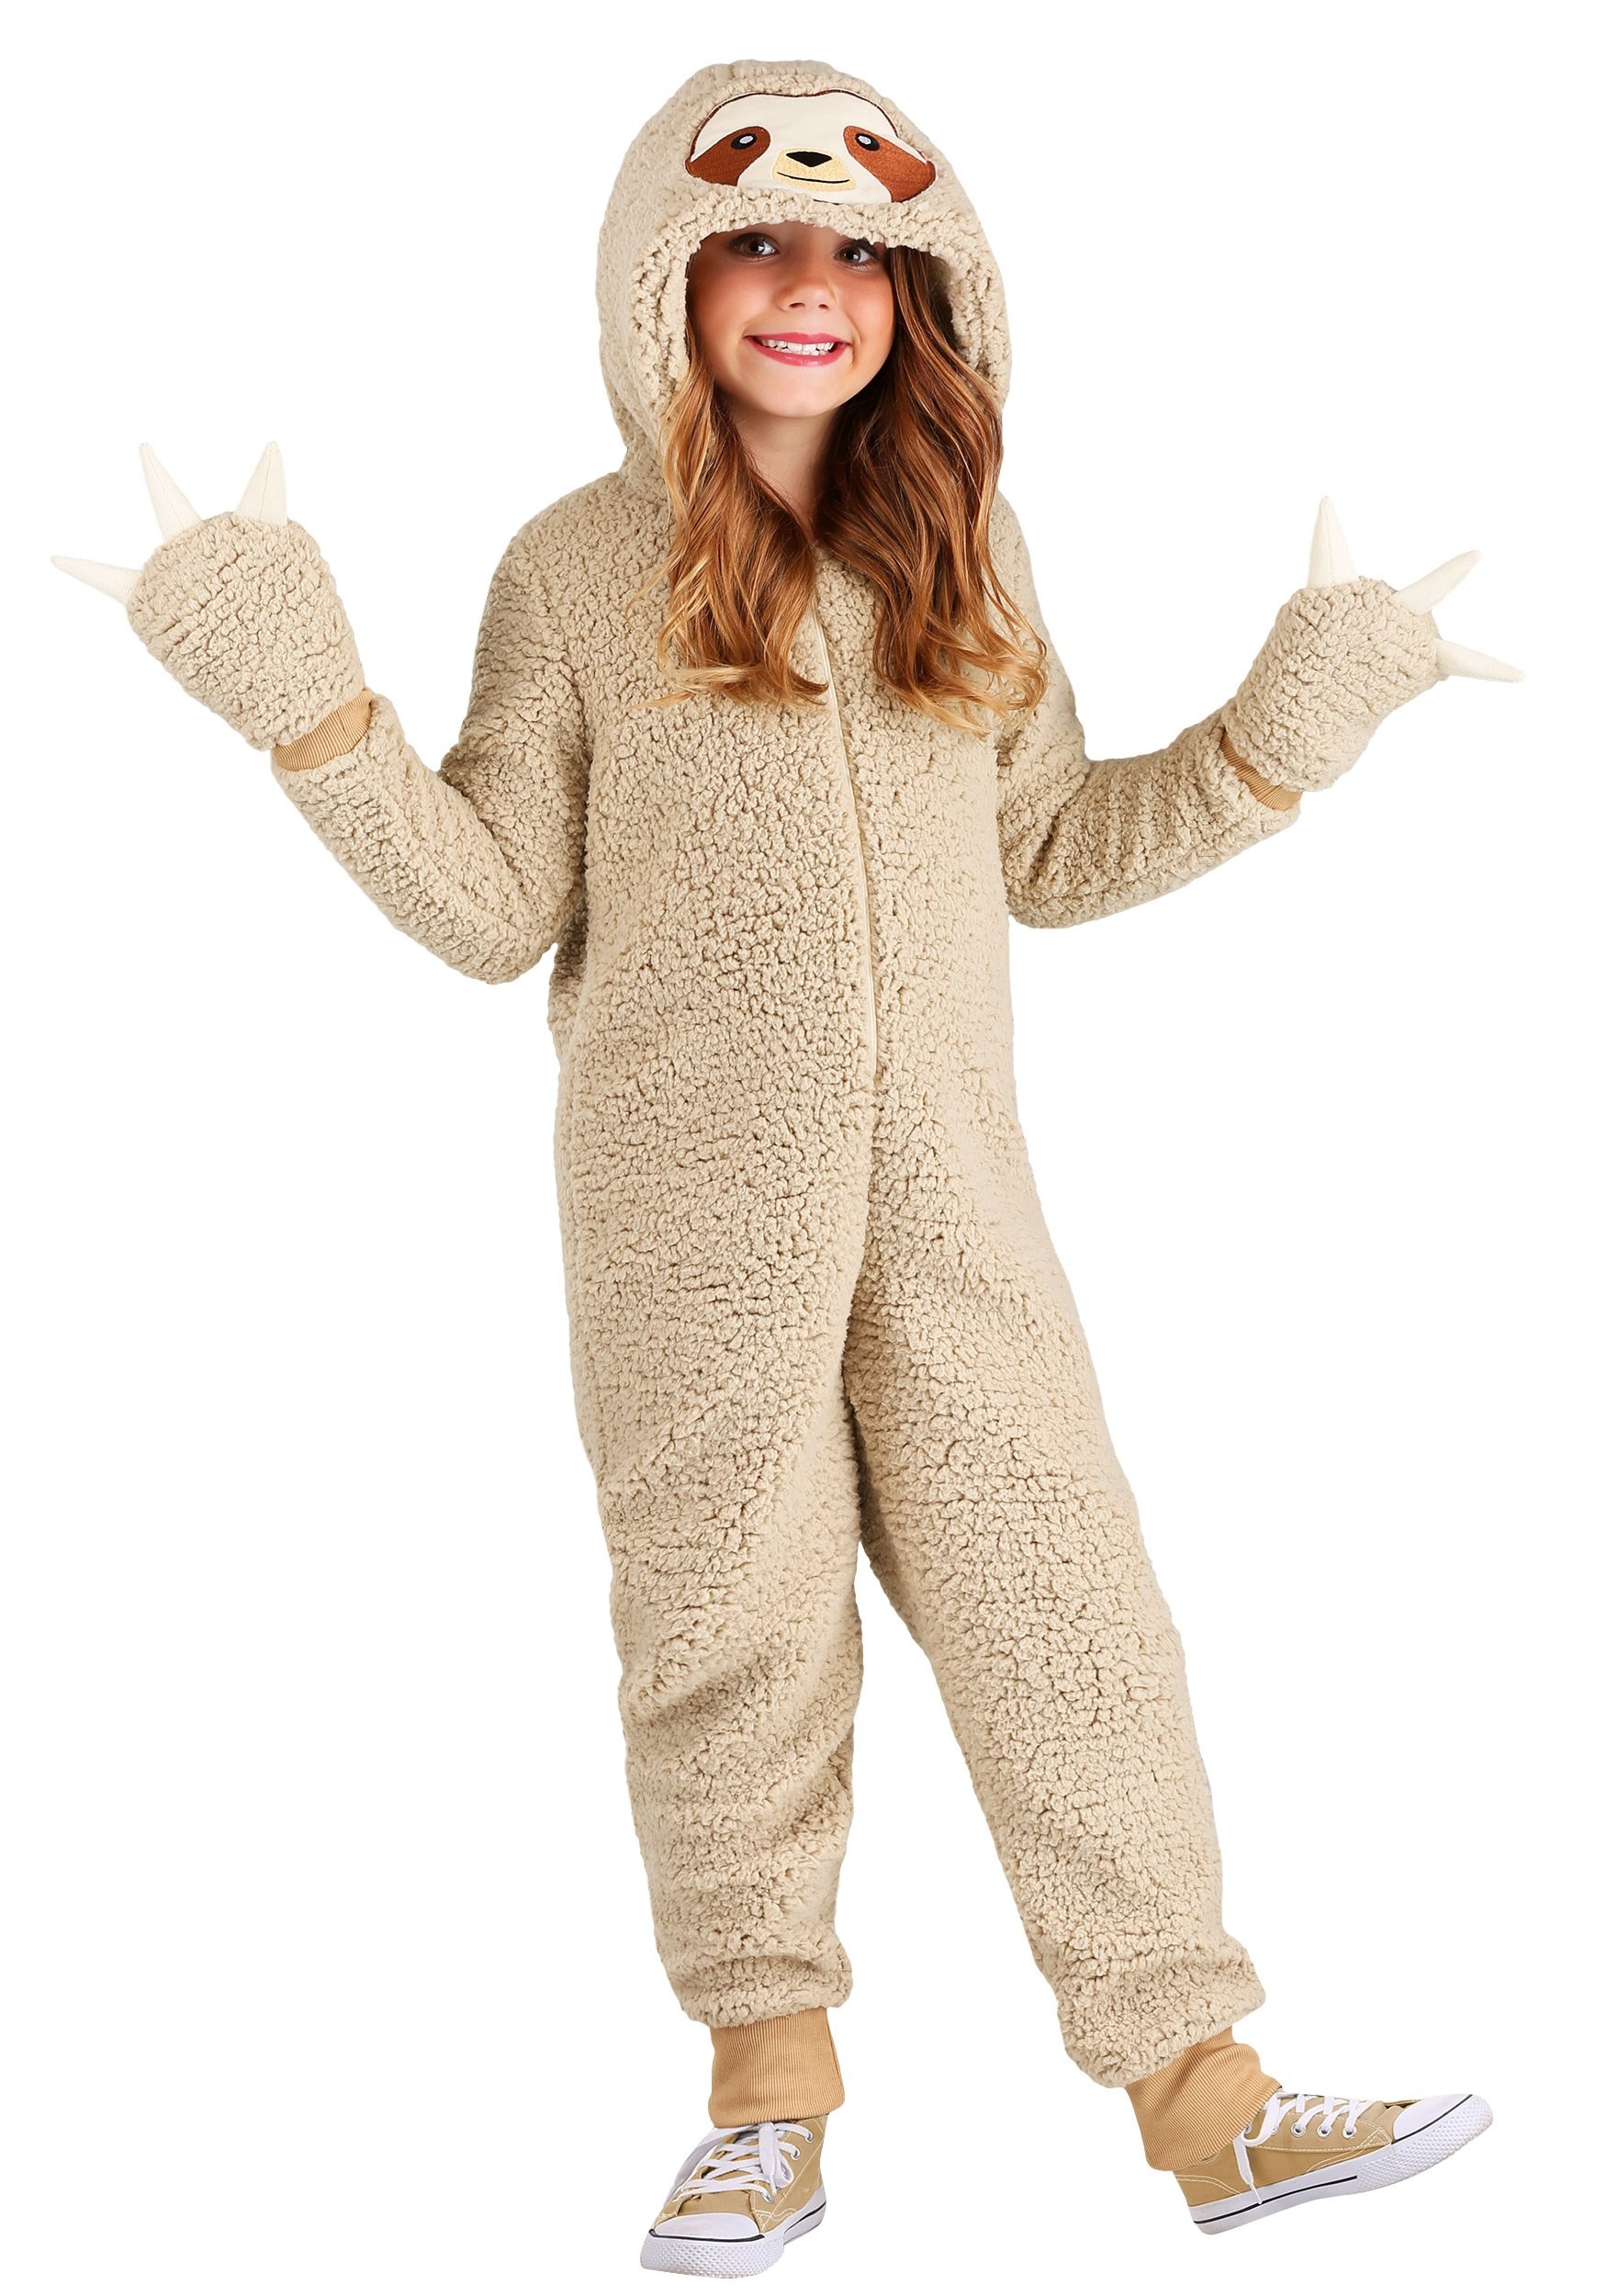 Photos - Fancy Dress FUN Costumes Sloth Onesie Costume for Kids Brown